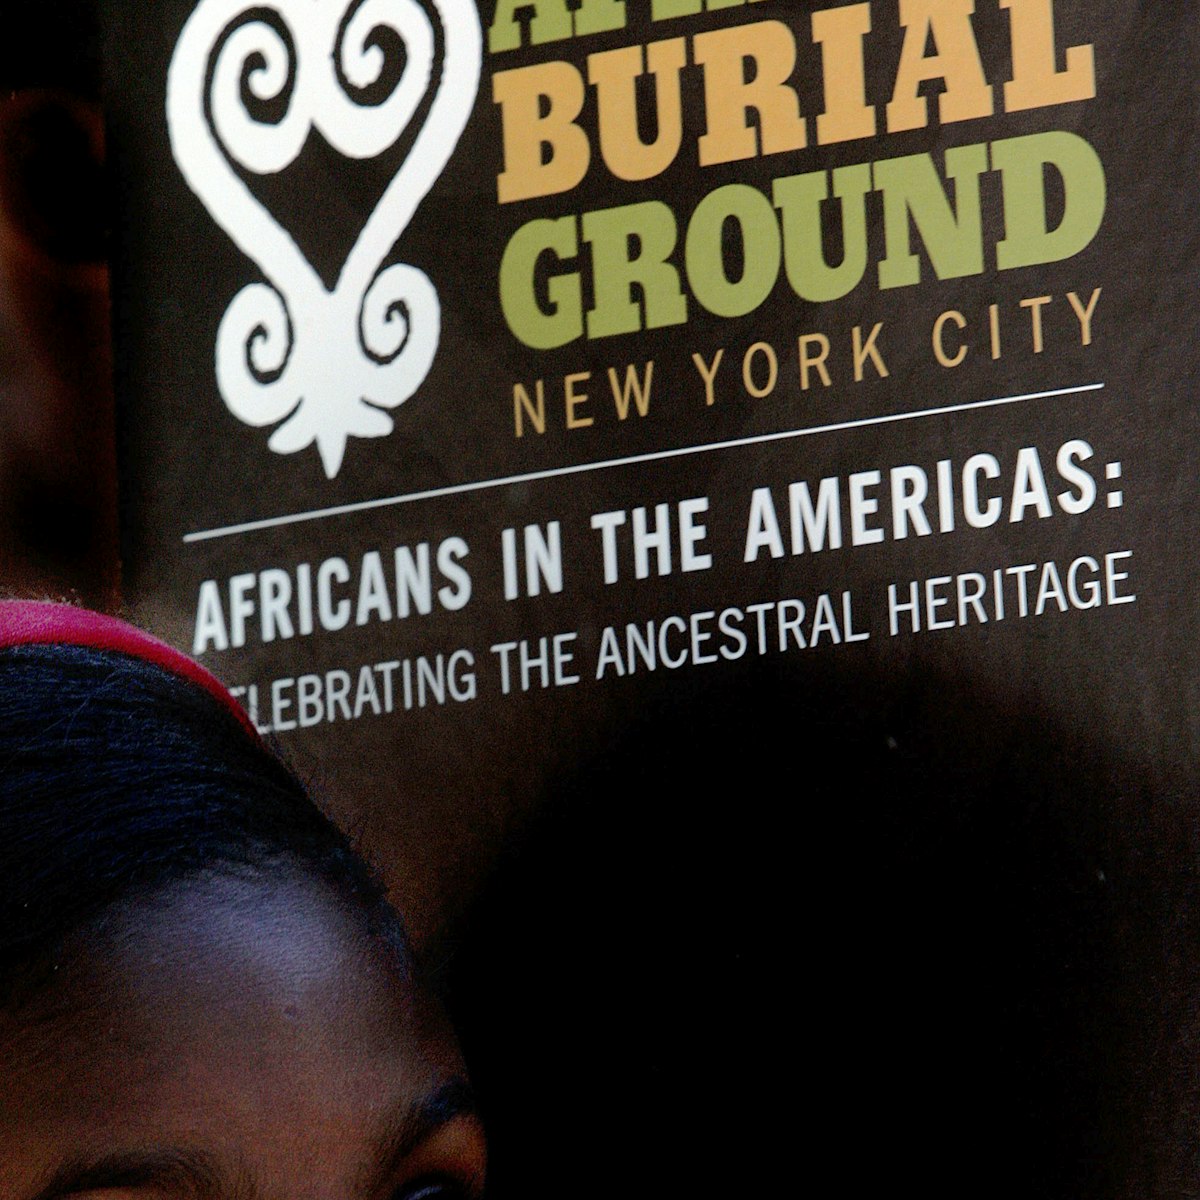 NEW YORK - SEPTEMBER 30: A school child listens to a speaker during a ceremony at the African Burial Ground September 30, 2005 in New York City. Hundreds of school children attended the tribute ceremony at the African Burial Ground, a final resting place for slaves that settled in New York City. The burial ground was dedicated in October 2003. (Photo by Stephen Chernin/Getty Images)